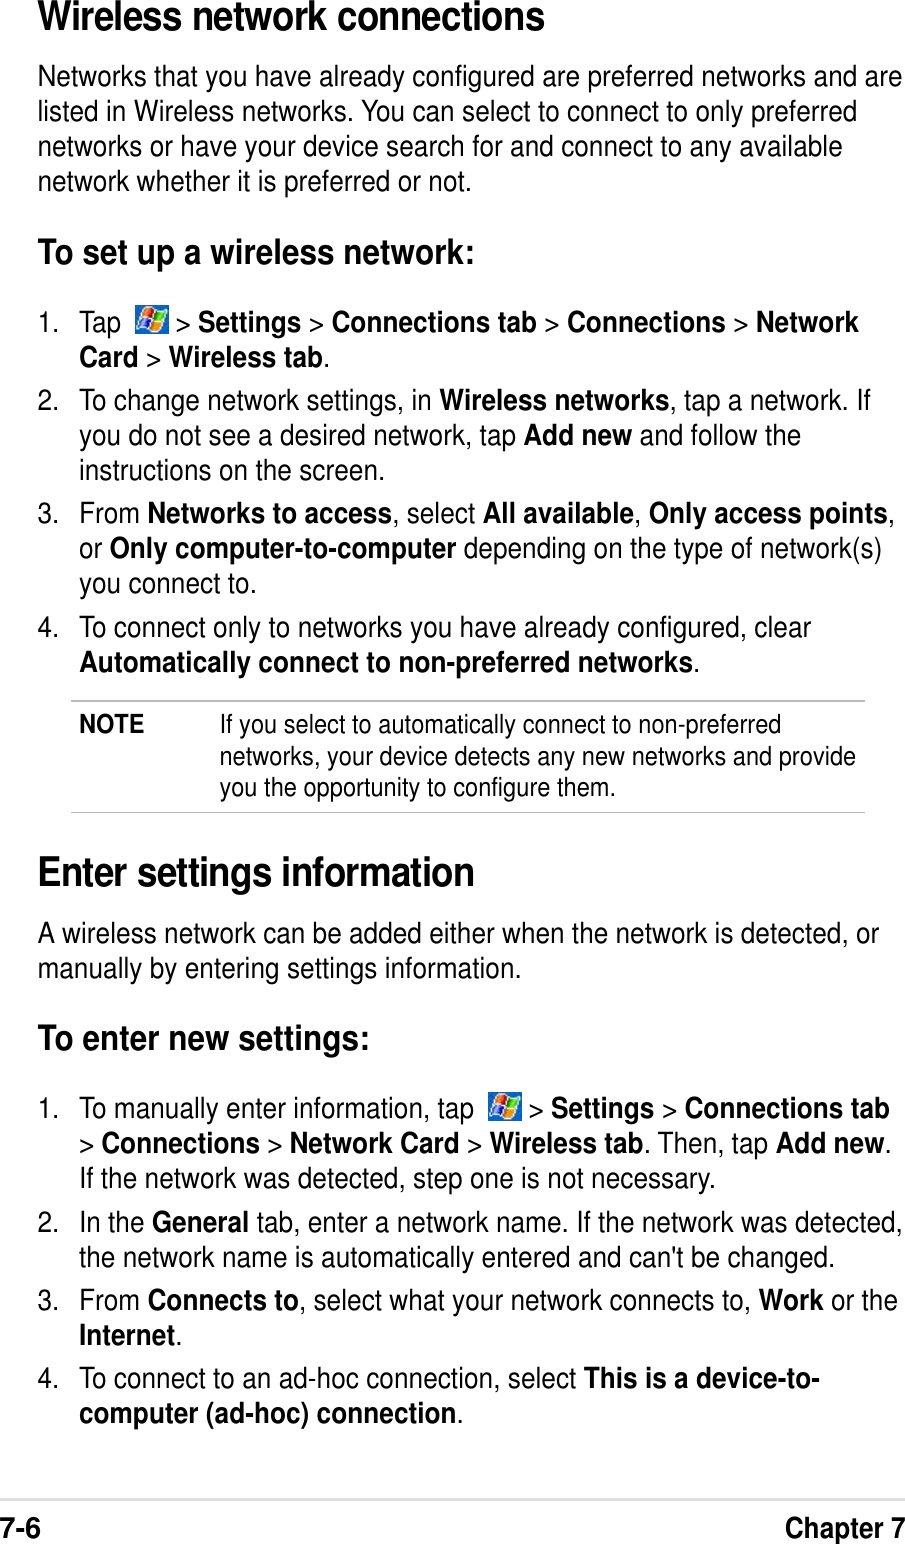 7-6Chapter 7Wireless network connectionsNetworks that you have already configured are preferred networks and arelisted in Wireless networks. You can select to connect to only preferrednetworks or have your device search for and connect to any availablenetwork whether it is preferred or not.To set up a wireless network:1. Tap    &gt; Settings &gt; Connections tab &gt; Connections &gt; NetworkCard &gt; Wireless tab.2. To change network settings, in Wireless networks, tap a network. Ifyou do not see a desired network, tap Add new and follow theinstructions on the screen.3. From Networks to access, select All available, Only access points,or Only computer-to-computer depending on the type of network(s)you connect to.4. To connect only to networks you have already configured, clearAutomatically connect to non-preferred networks.NOTE If you select to automatically connect to non-preferrednetworks, your device detects any new networks and provideyou the opportunity to configure them.Enter settings informationA wireless network can be added either when the network is detected, ormanually by entering settings information.To enter new settings:1. To manually enter information, tap    &gt; Settings &gt; Connections tab&gt; Connections &gt; Network Card &gt; Wireless tab. Then, tap Add new.If the network was detected, step one is not necessary.2. In the General tab, enter a network name. If the network was detected,the network name is automatically entered and can&apos;t be changed.3. From Connects to, select what your network connects to, Work or theInternet.4. To connect to an ad-hoc connection, select This is a device-to-computer (ad-hoc) connection.